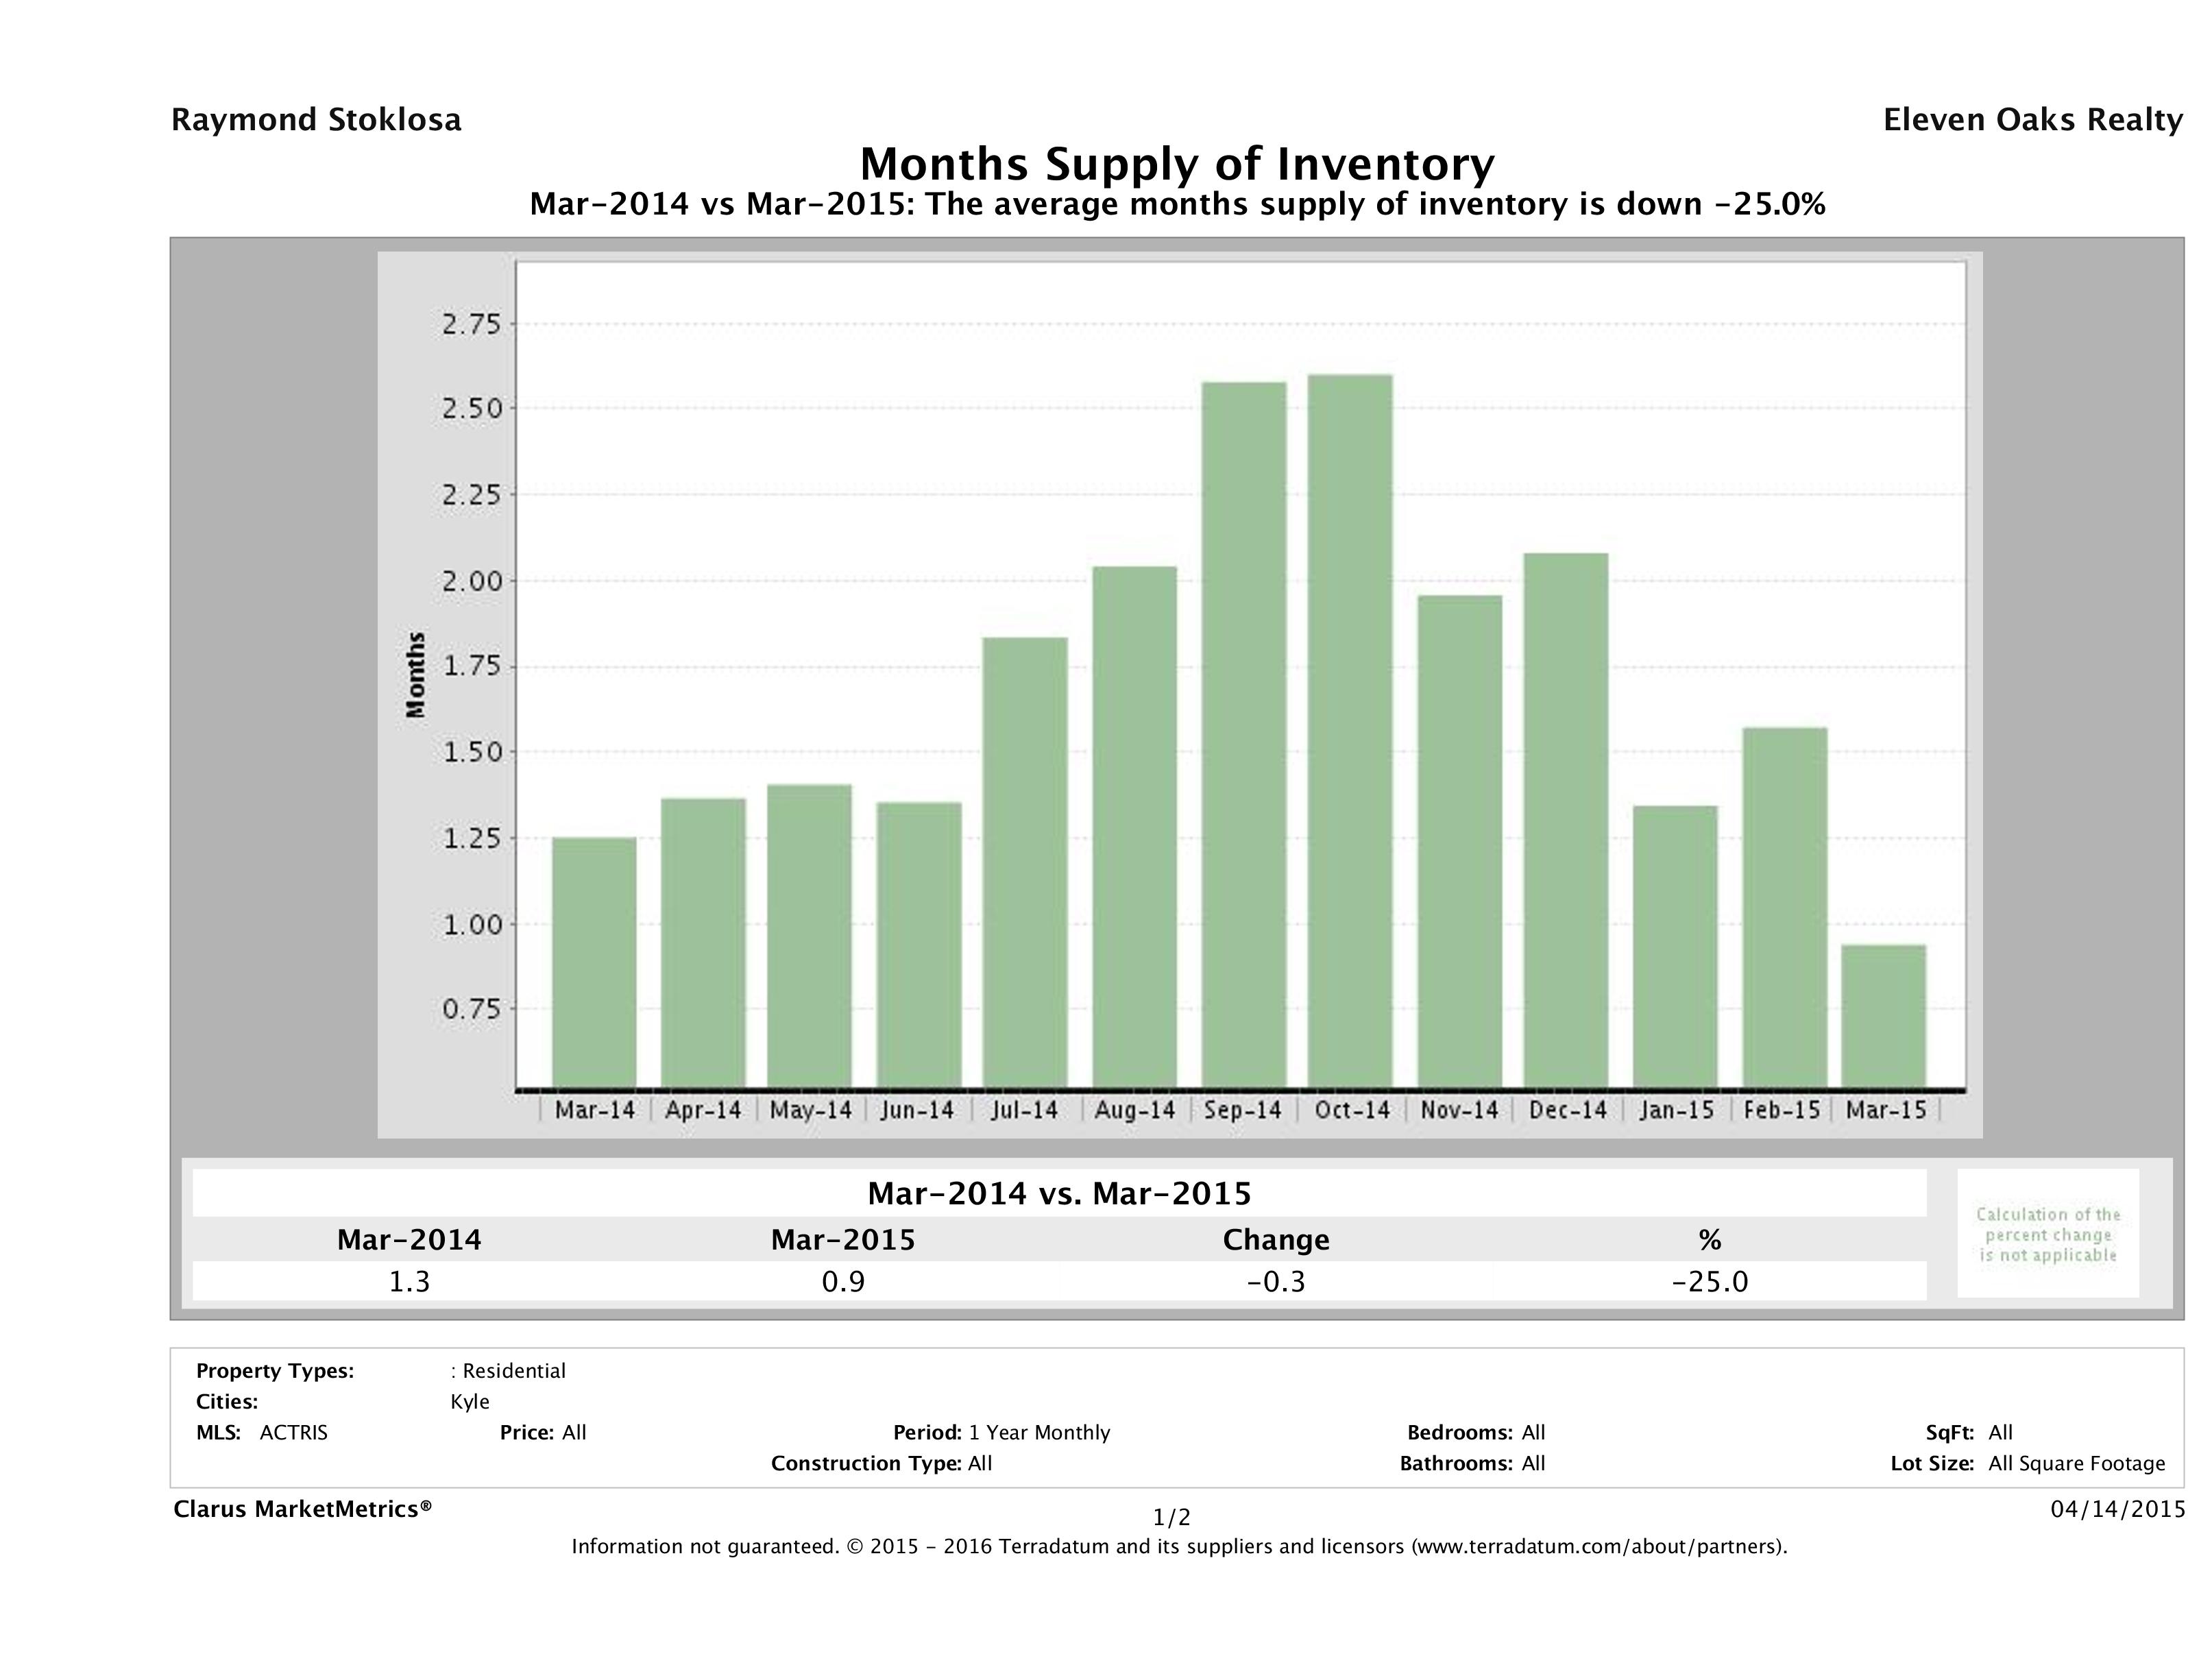 Kyle single family home months inventory March 2015